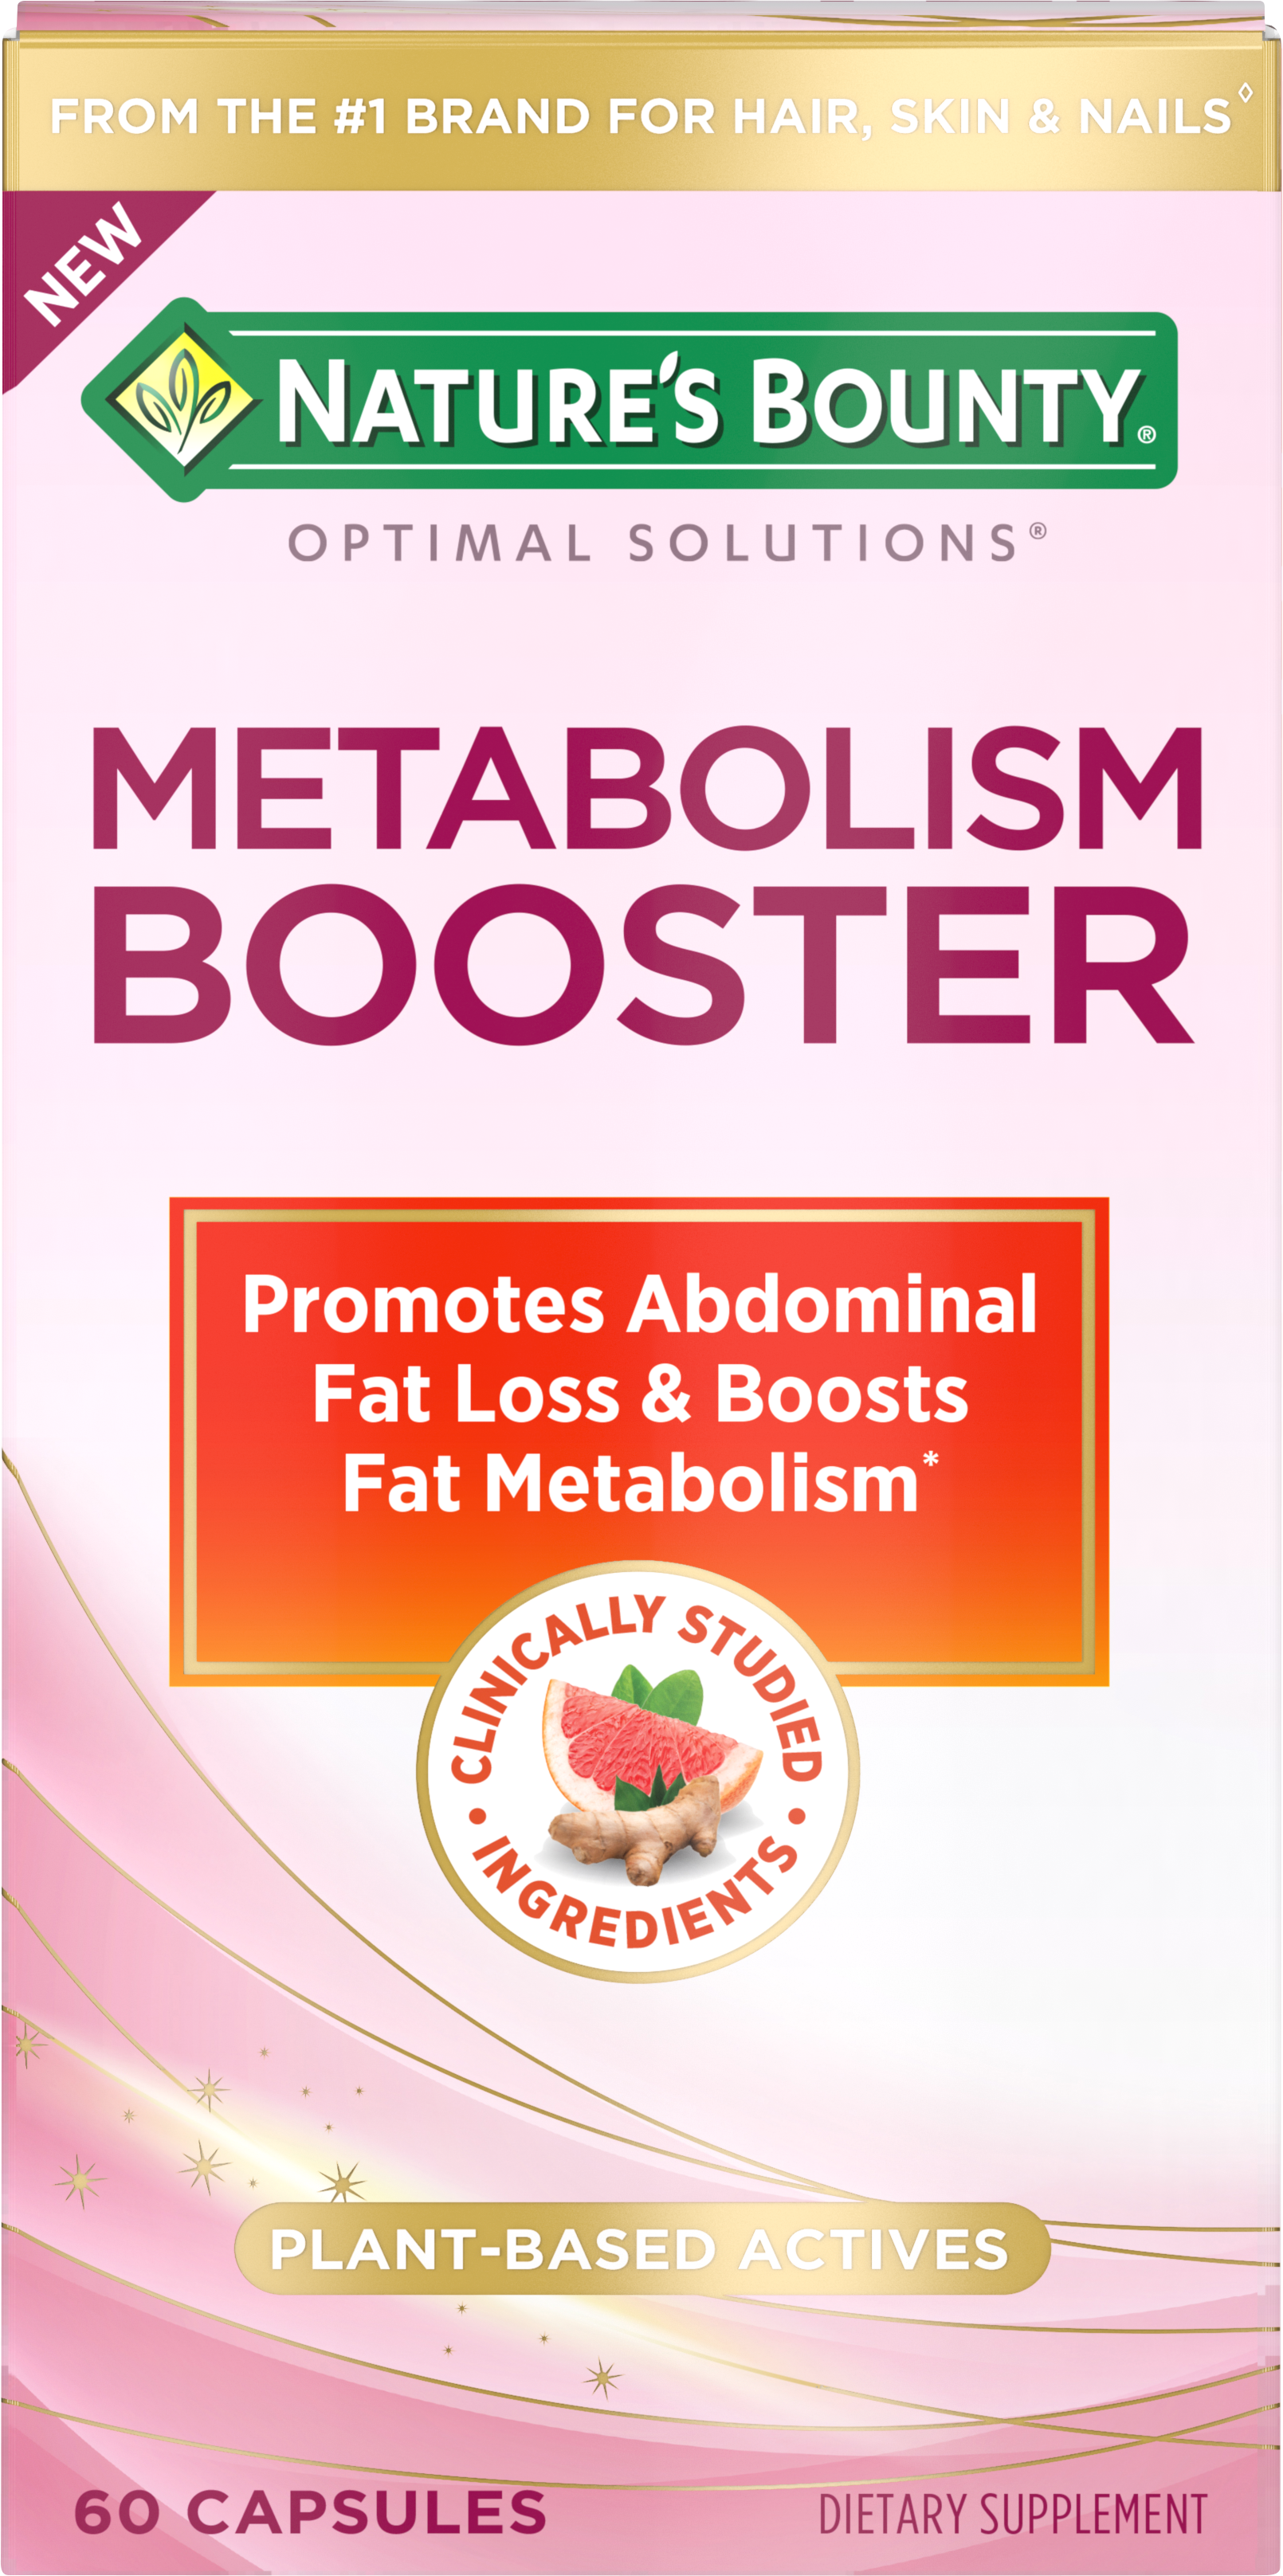 How to Boost Metabolism: Natural Ways, Foods, Tips, and More